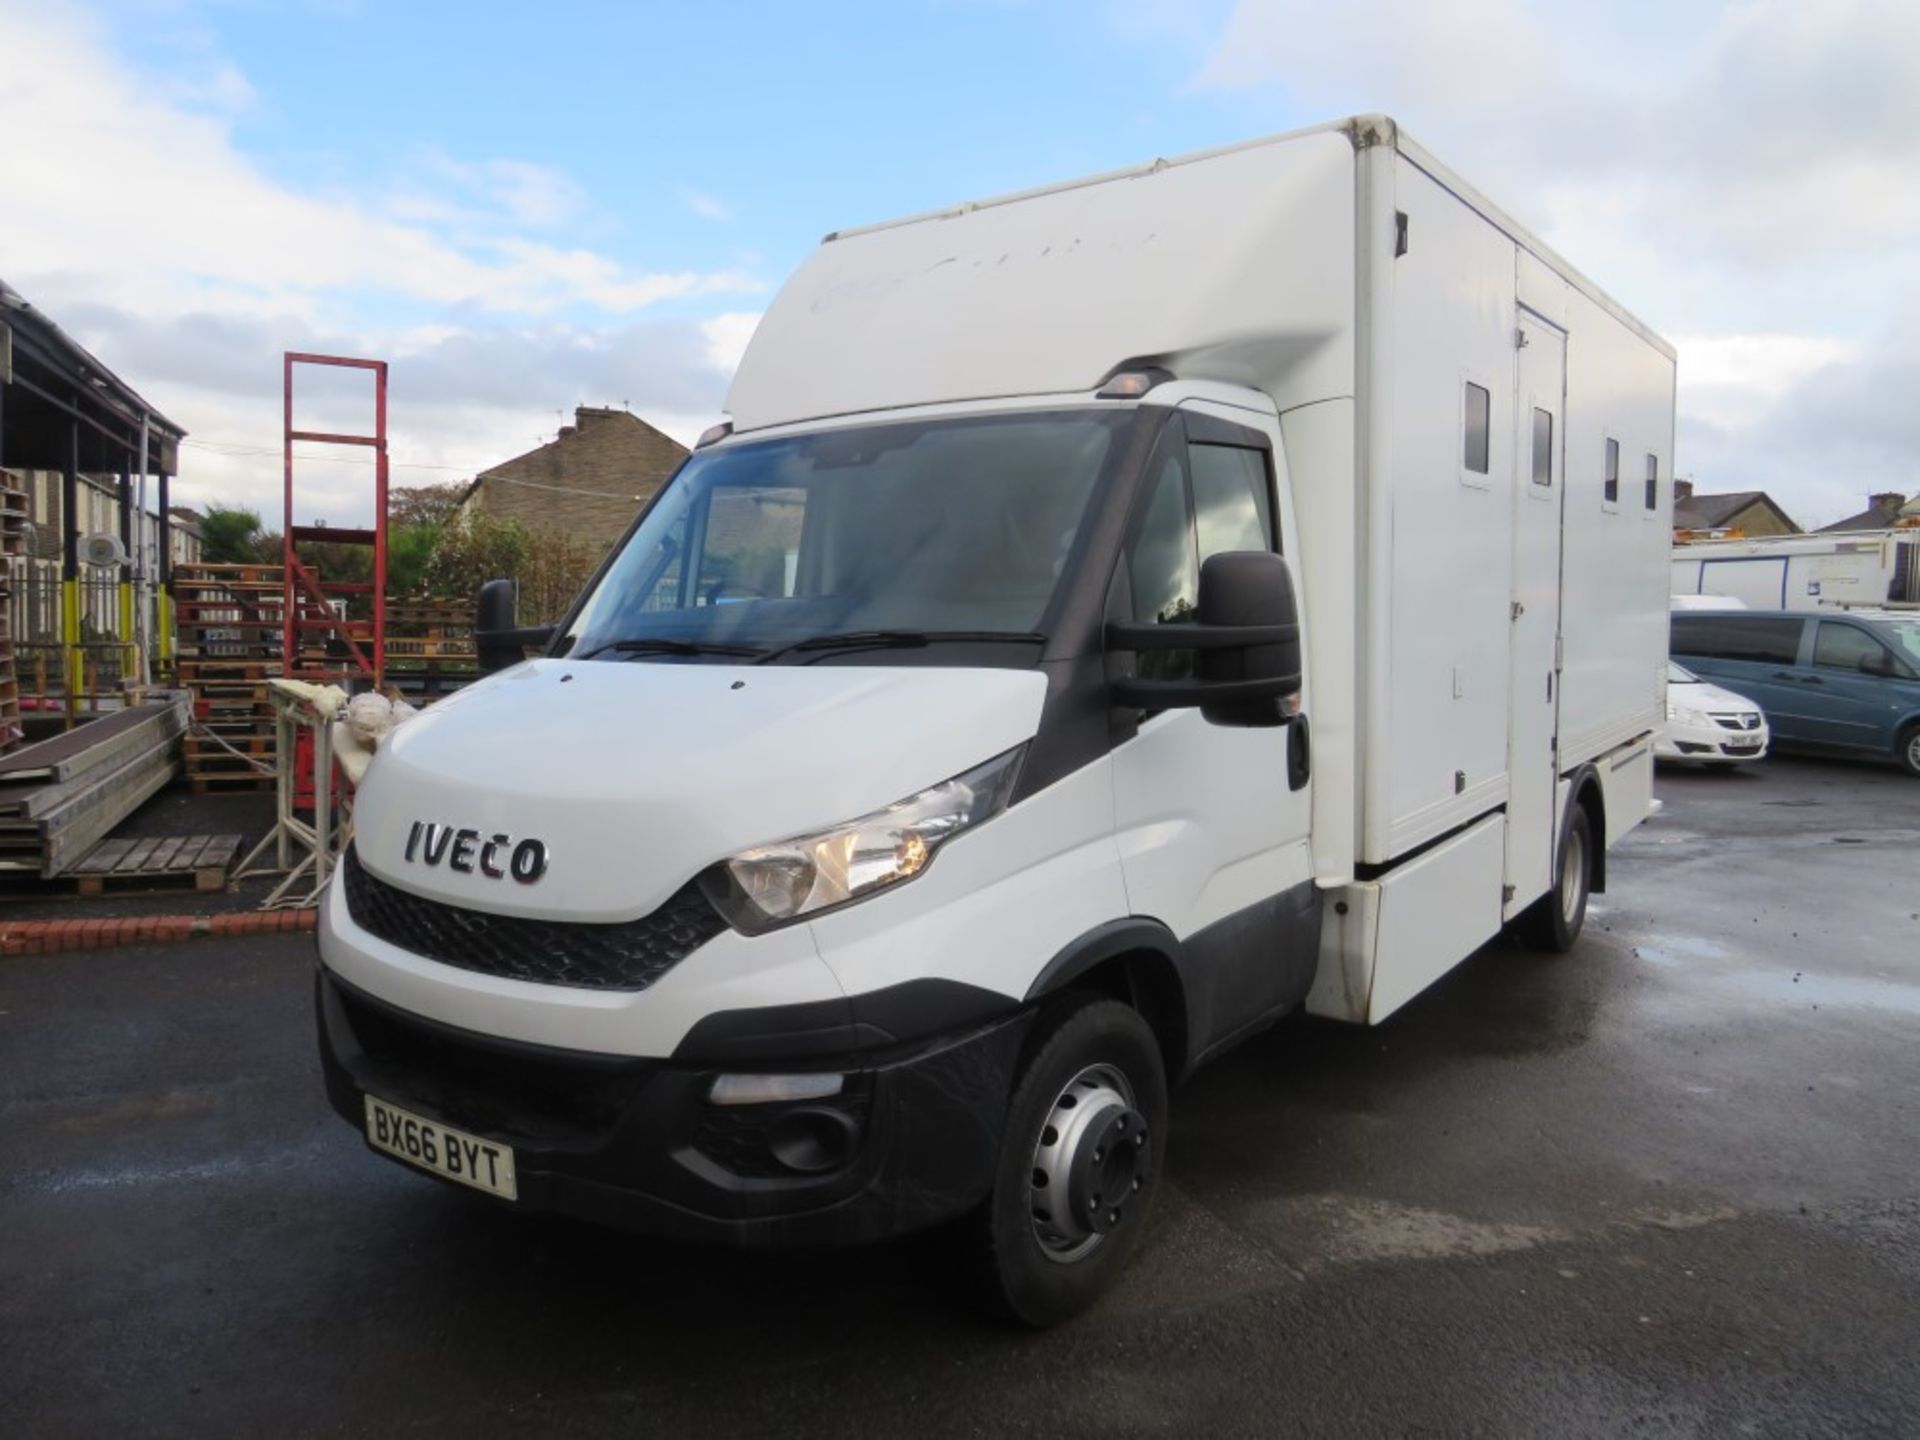 66 reg IVECO DAILY 70C17 PRISON VAN, 1ST REG 09/16, TEST 06/22, 122684M, V5 HERE, 1 OWNER FROM - Image 2 of 7